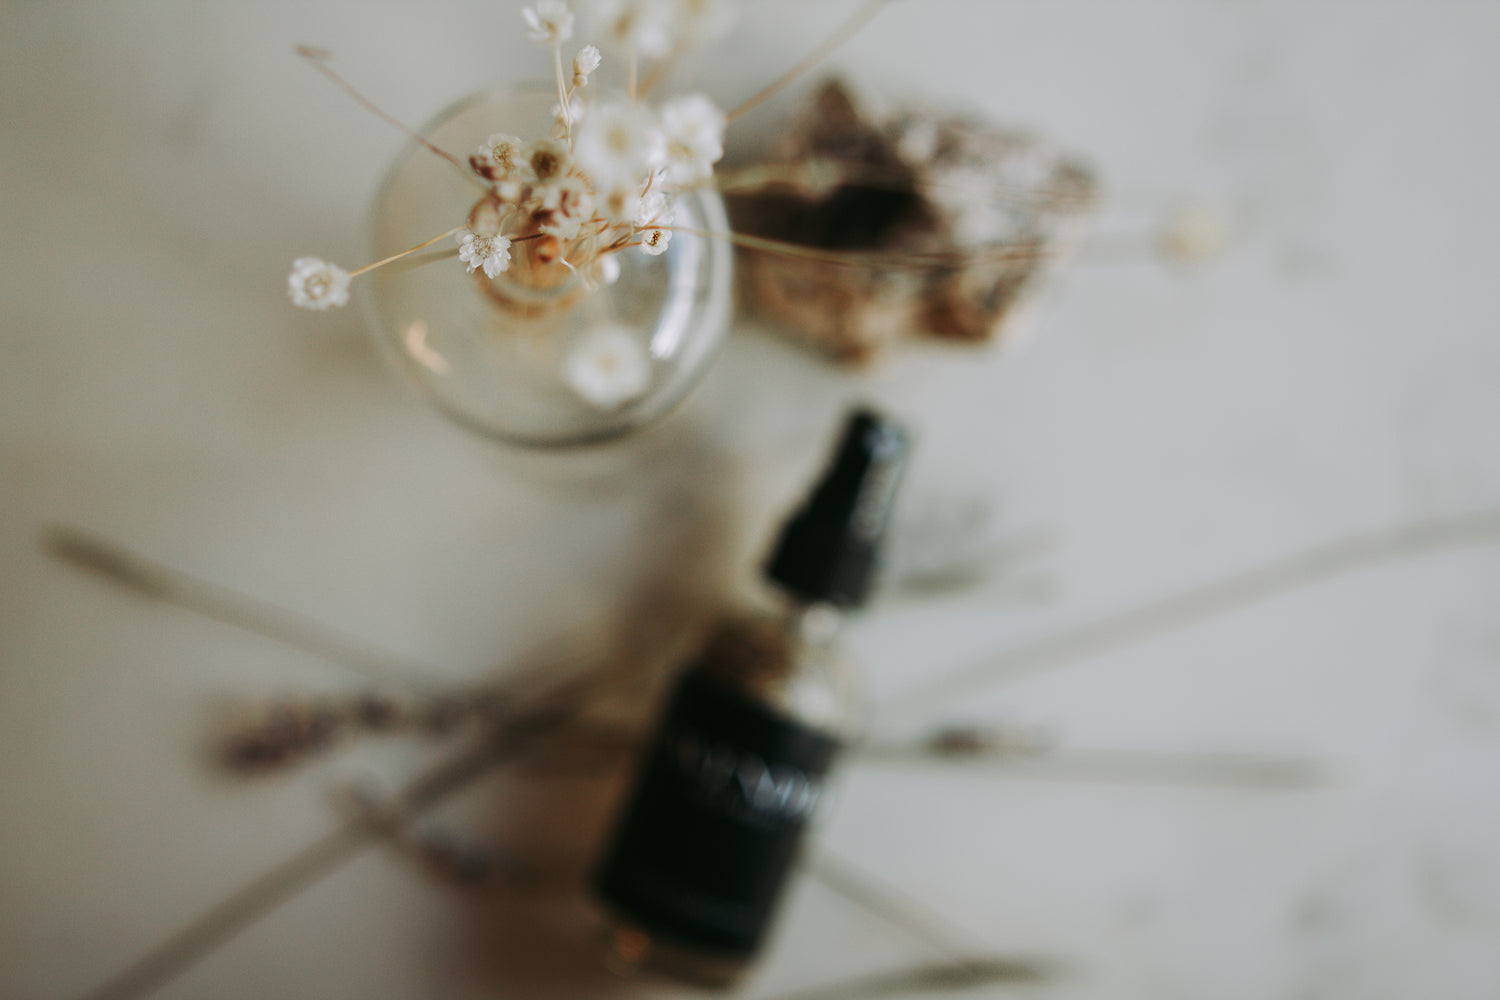 an out of focus rose spray bottle lays behind a jar of white flowers